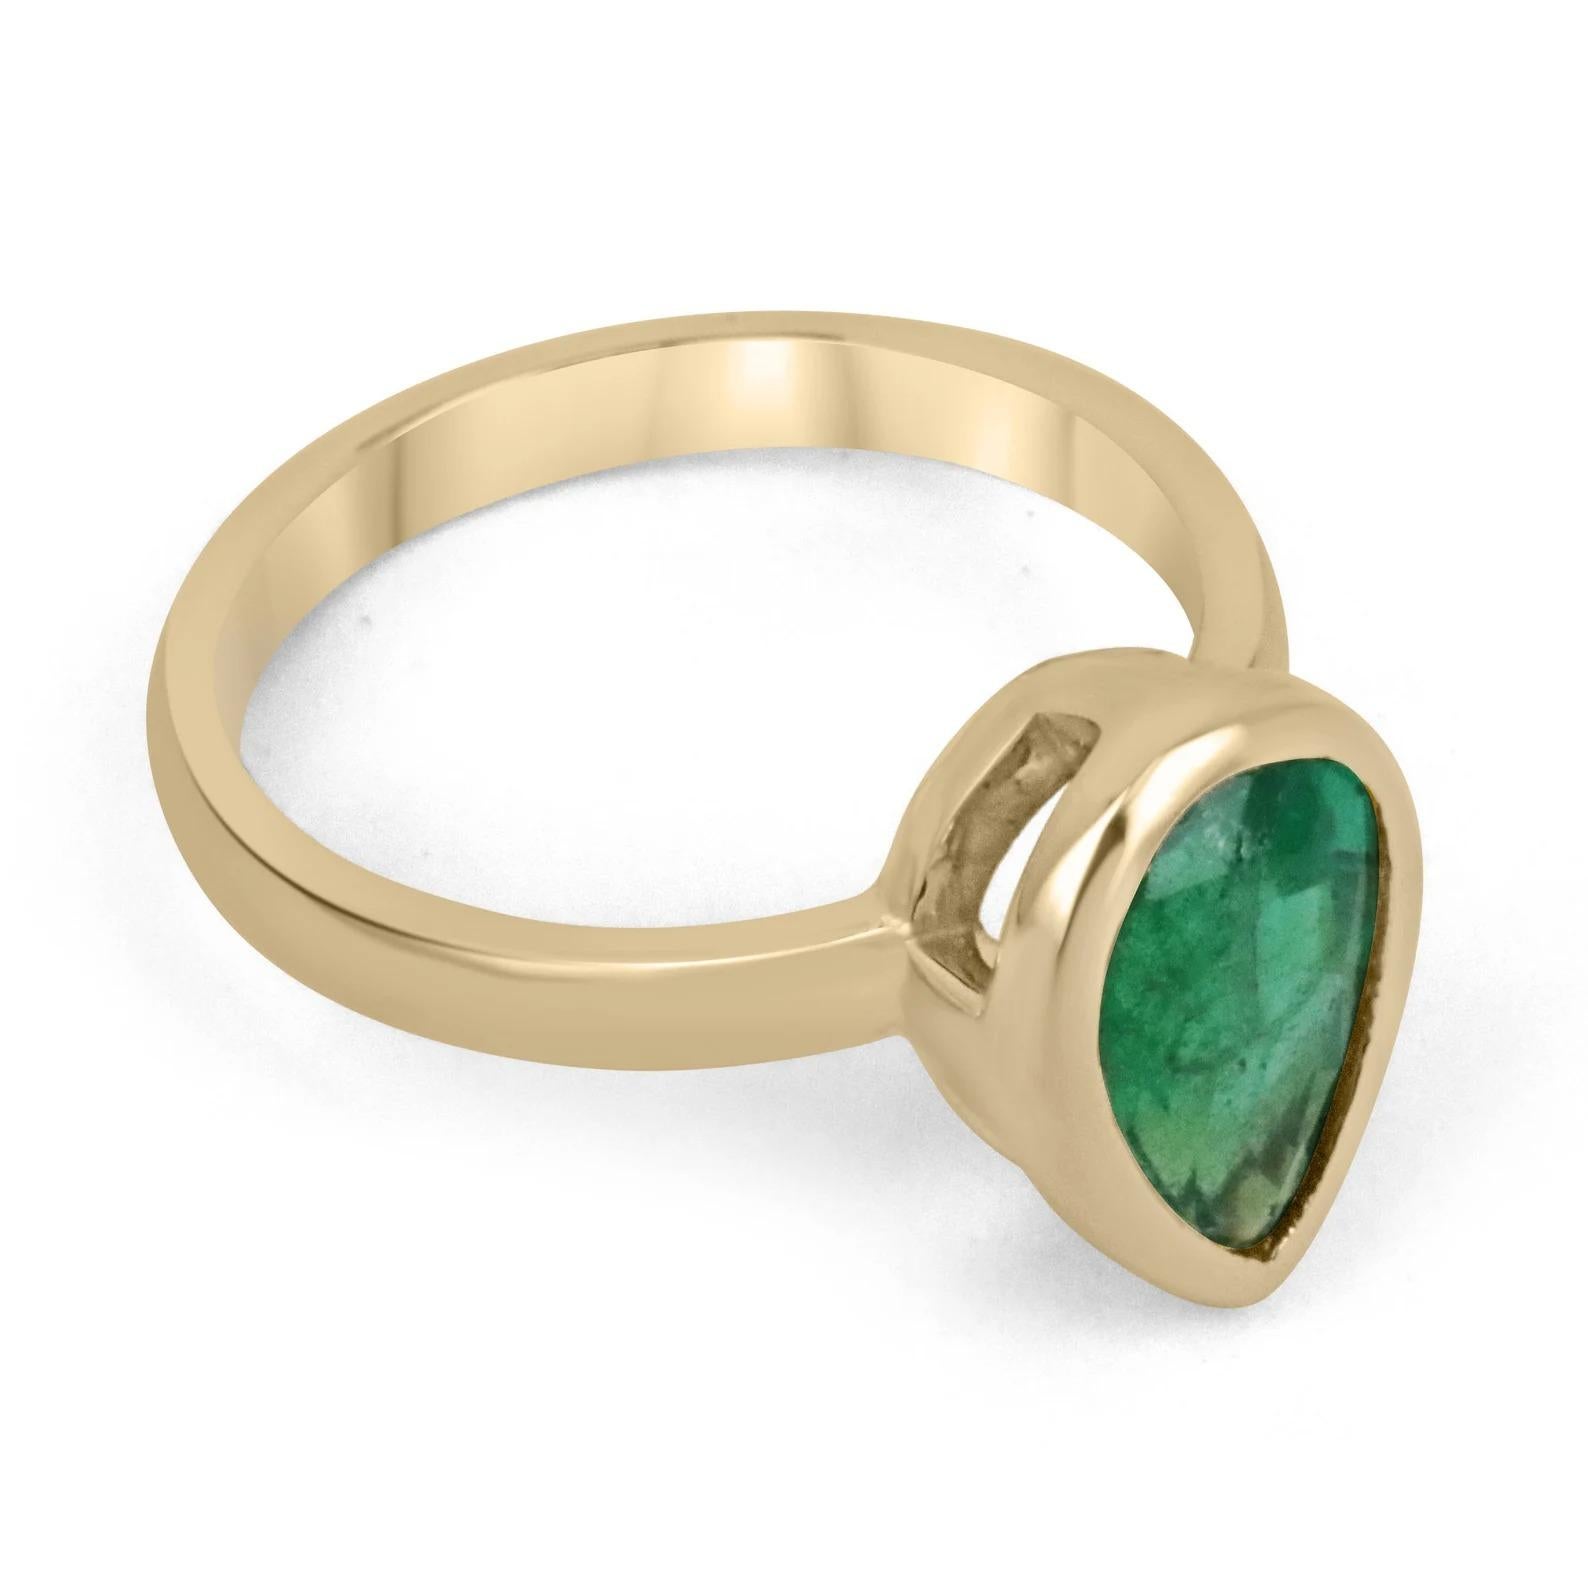 Displayed is a vivid green emerald bezel, teardrop solitaire ring in 14K gold. This gorgeous solitaire ring carries a full 2.40-carat emerald that has ideal color and excellent eye clarity. Minor imperfections are normal as this emerald is a